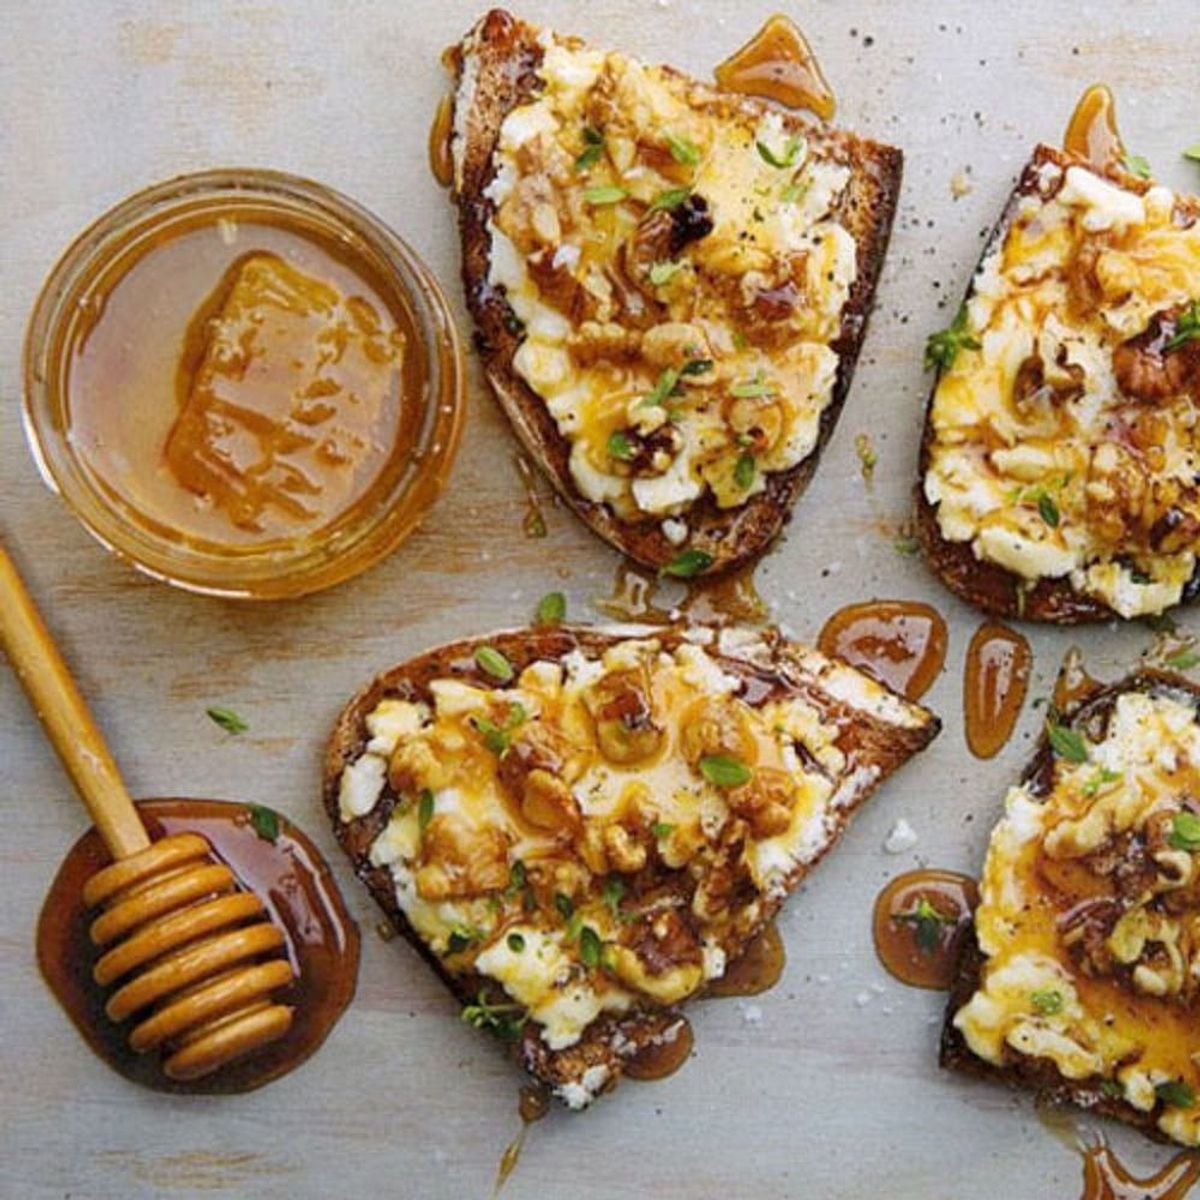 16 Tasty Toast Toppings for an Easy Breakfast Upgrade